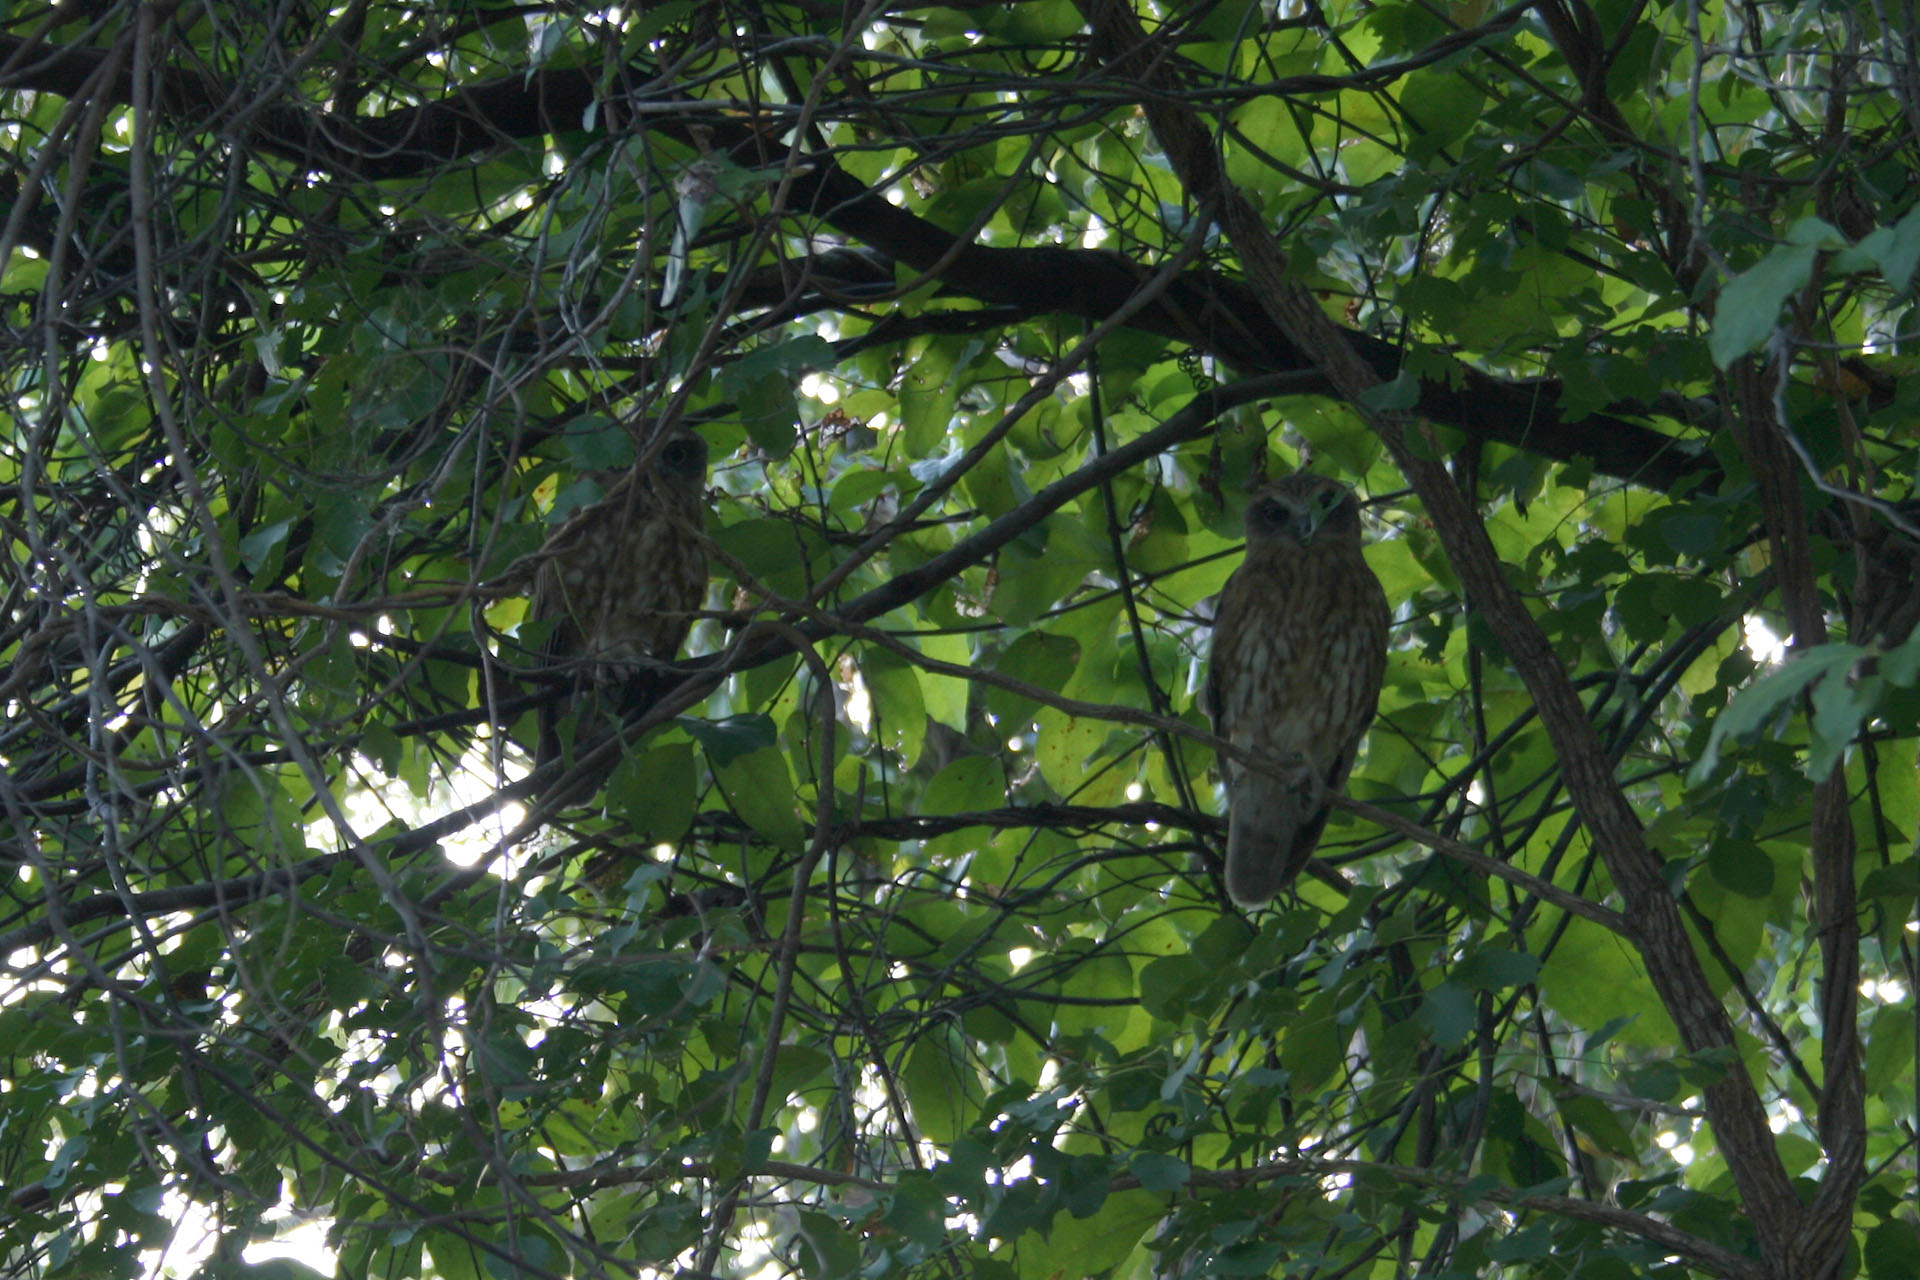 The local owls.